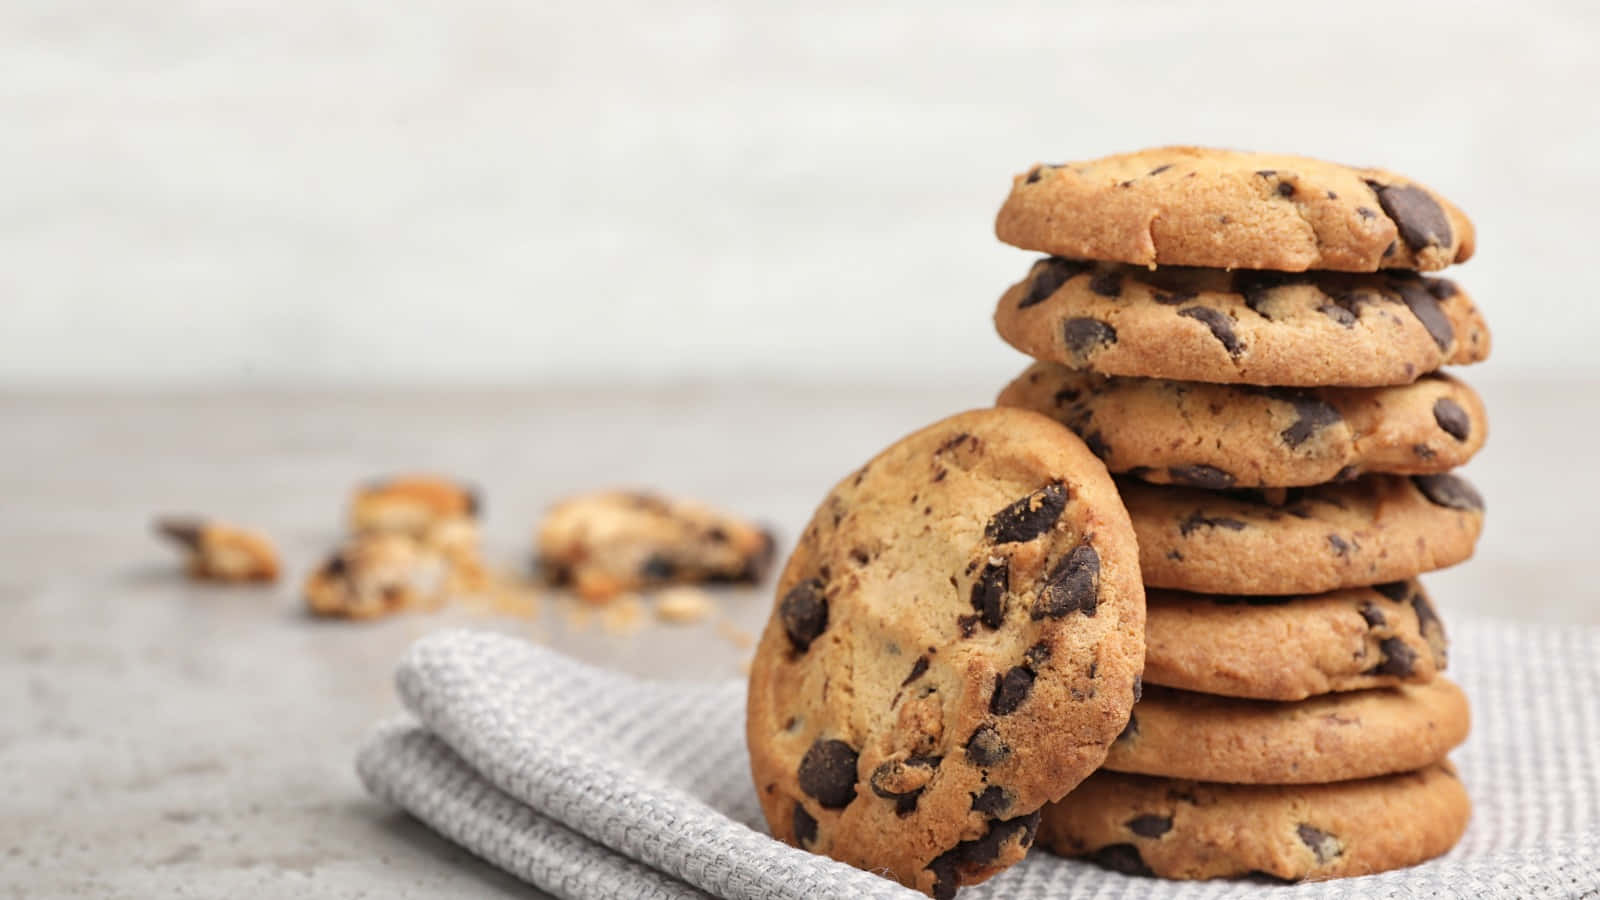 Chocolate Chip Cookies On A Napkin